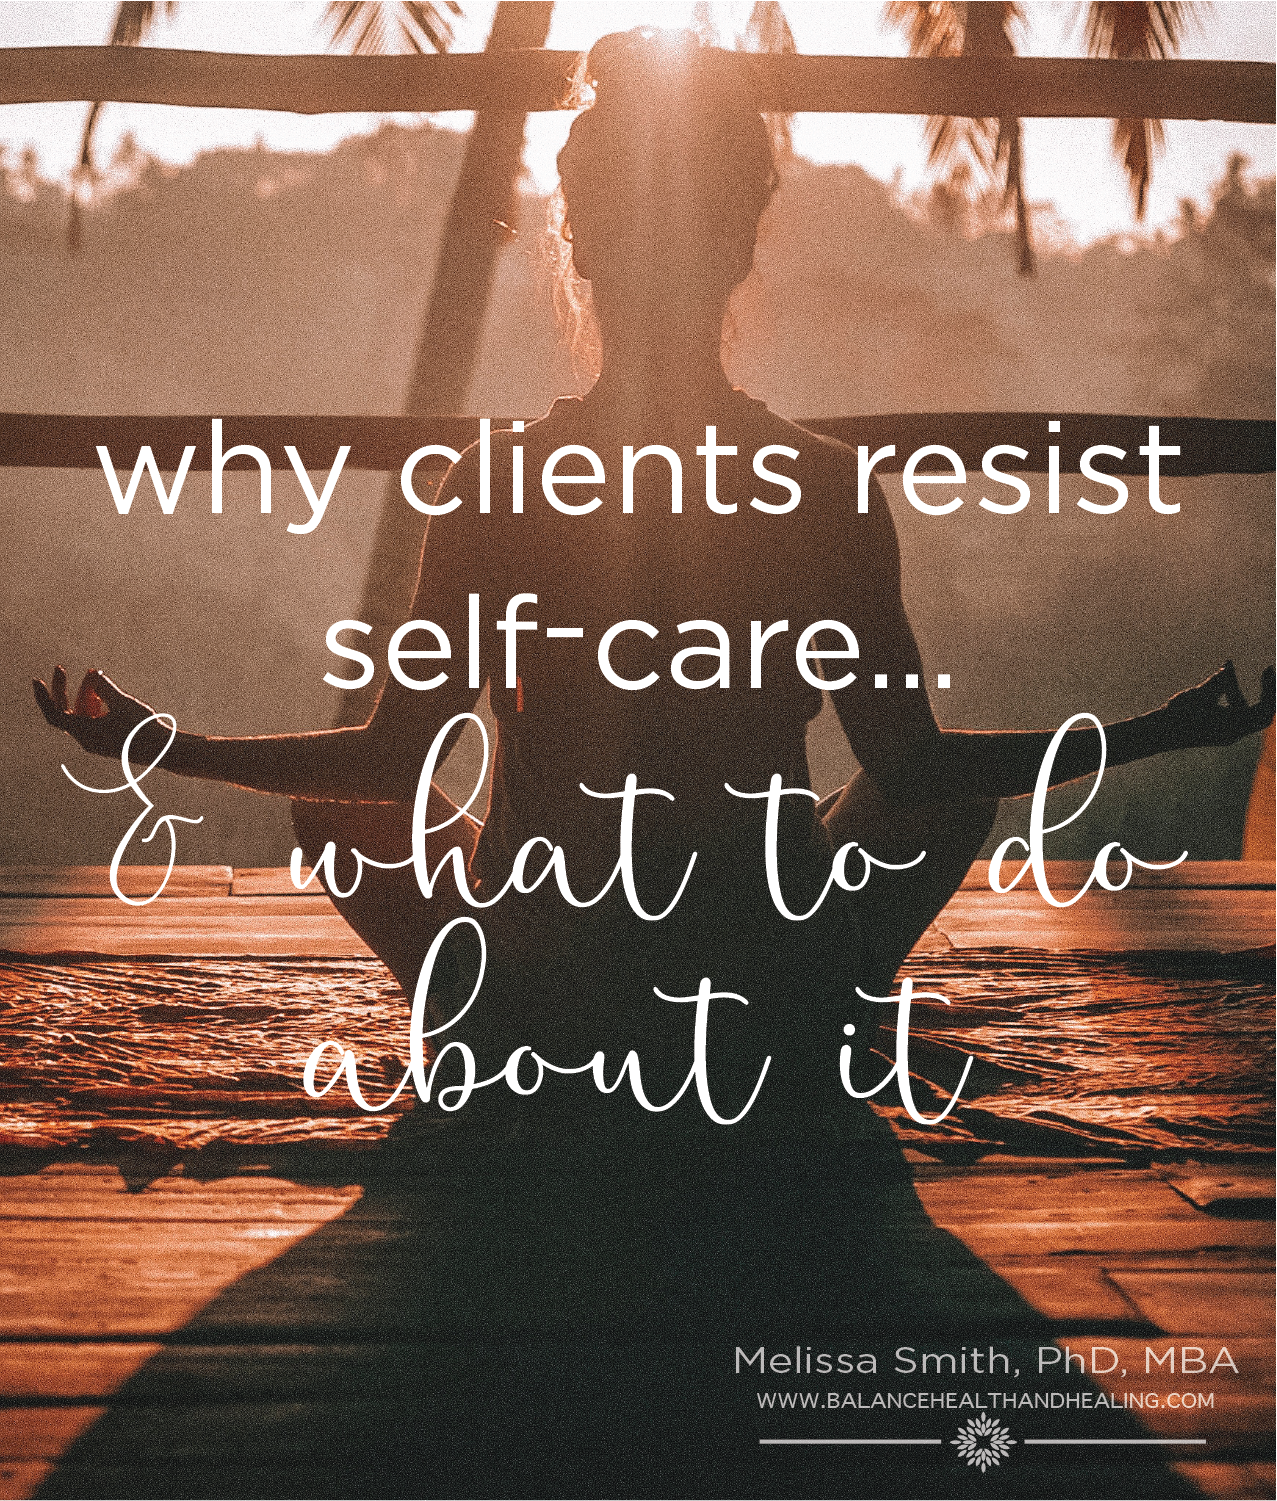 Why Clients Resist Self-Care and What to Do About It